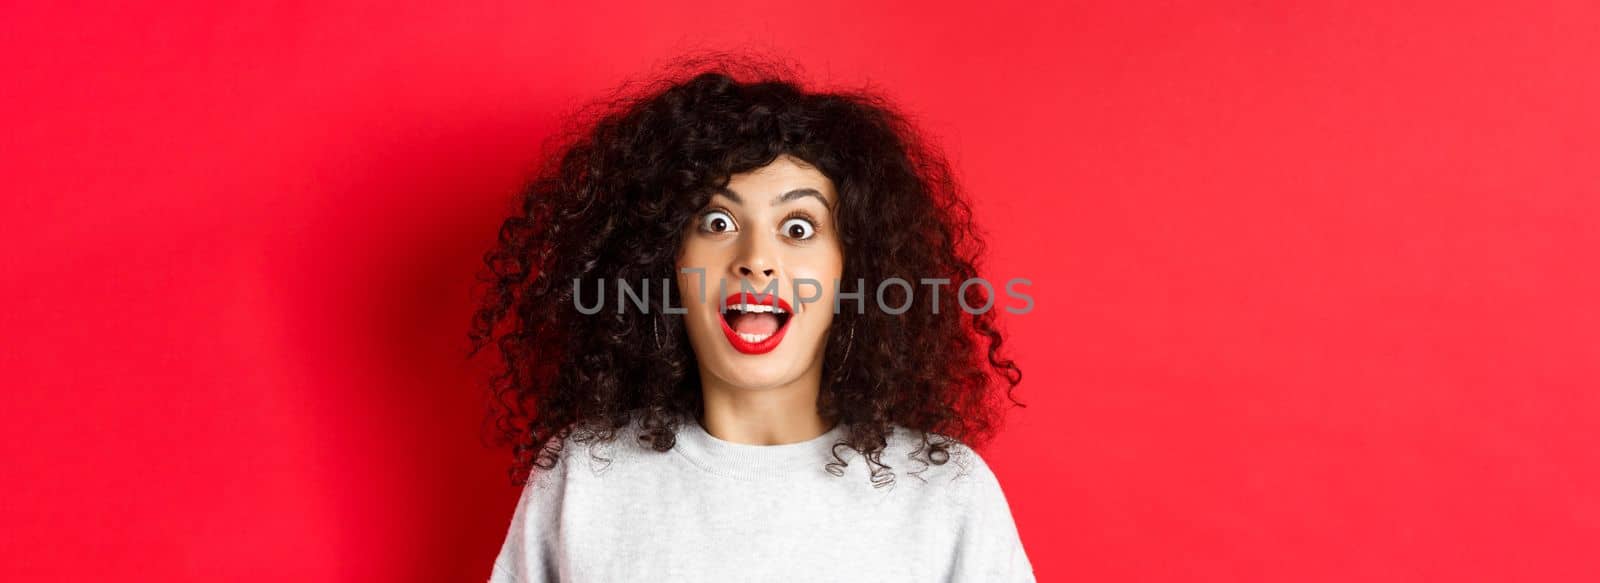 Close-up portrait of excited woman with curly hair, scream surprised and amazed, checking out special deal, standing on red background.